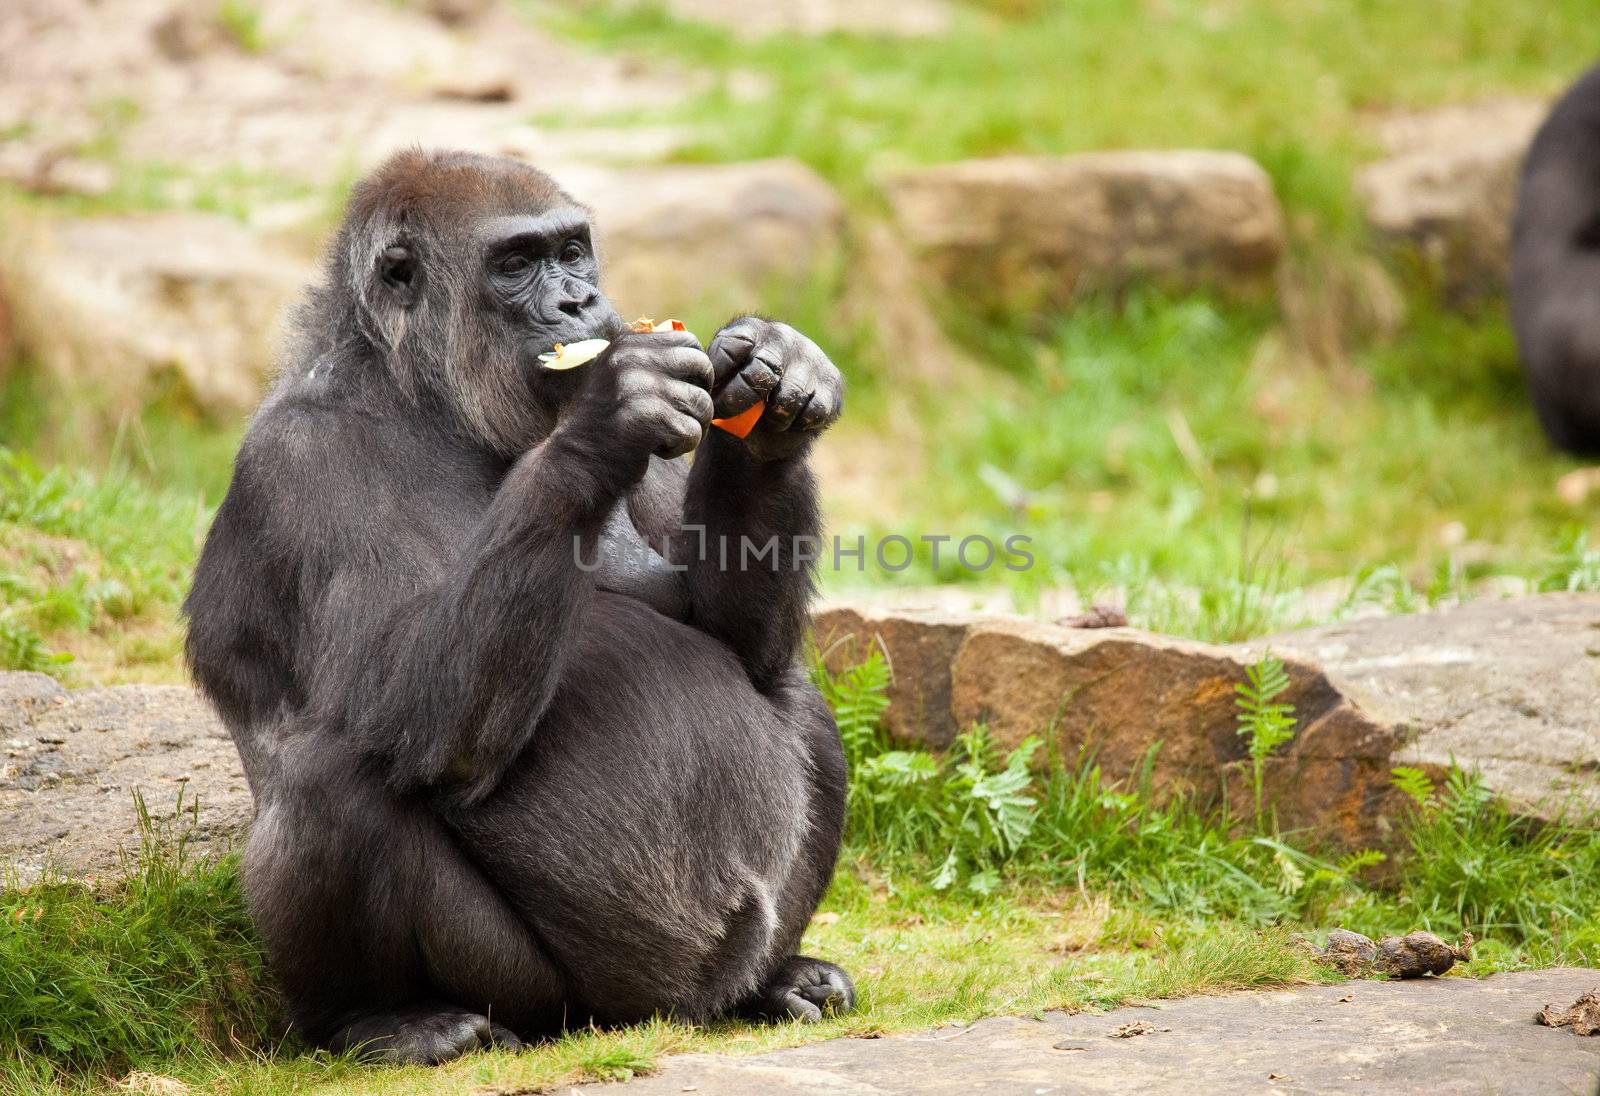 Rather large female gorilla eating and stuffing the food in her mouth